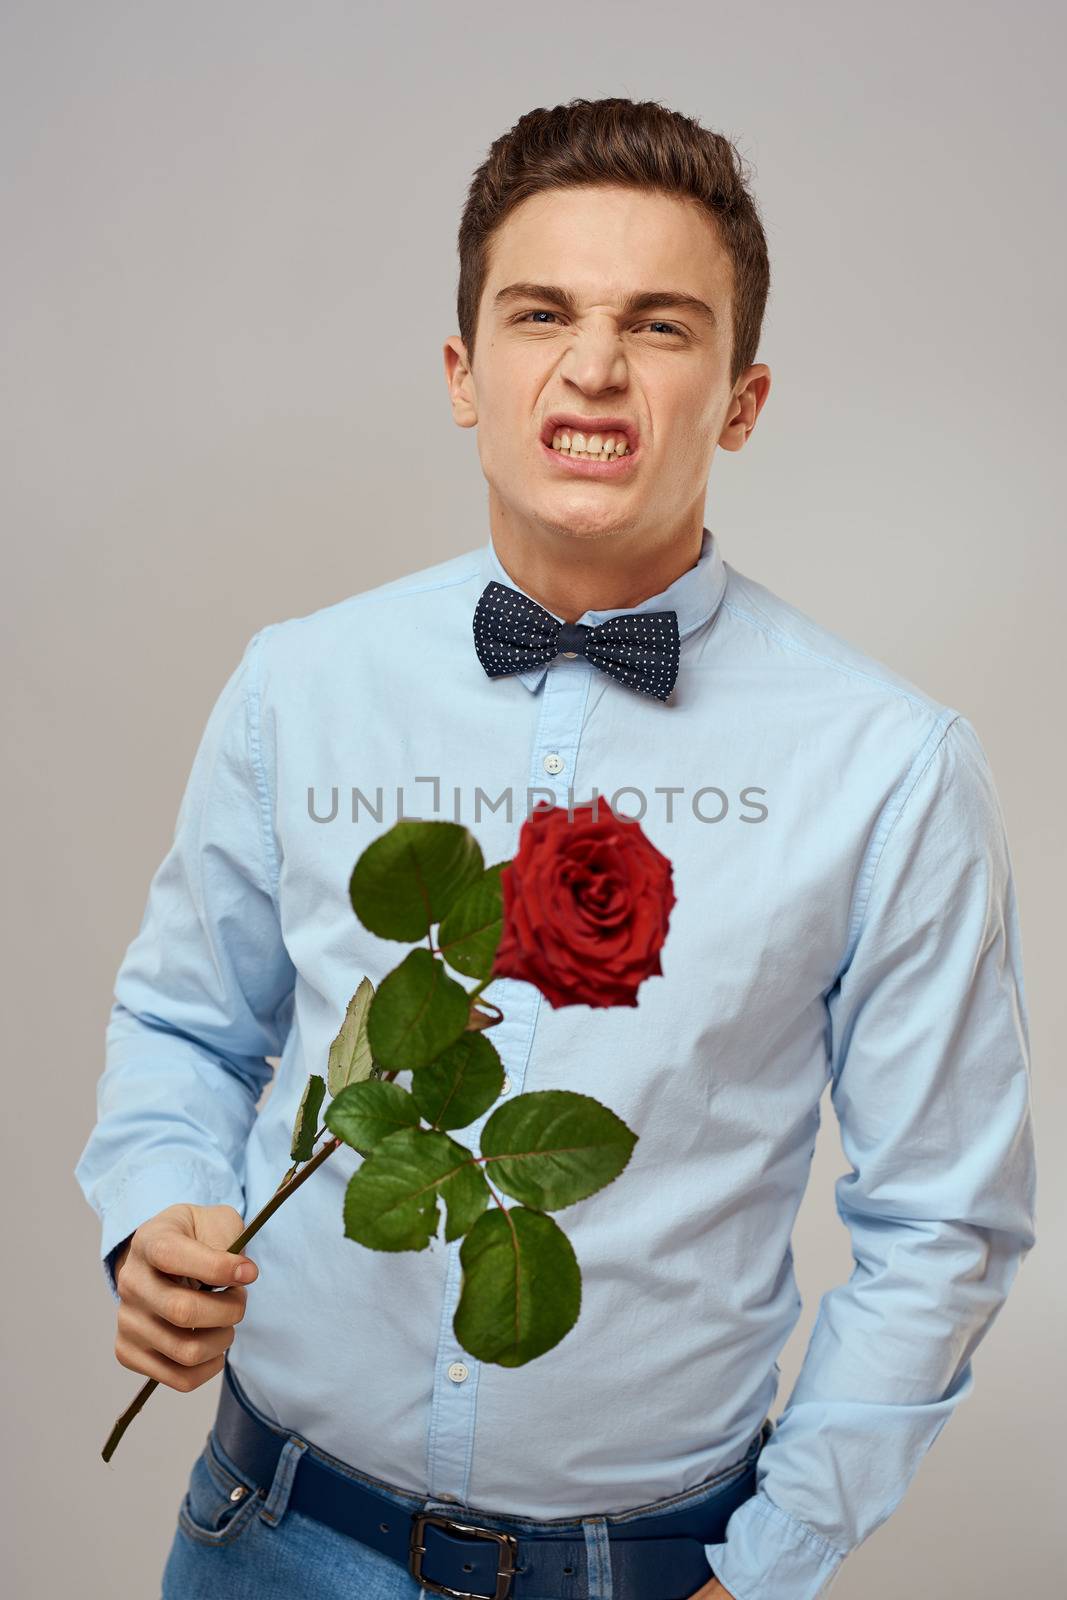 Romantic man with a red rose and in a blue shirt with a bow tie around his neck gray background. High quality photo